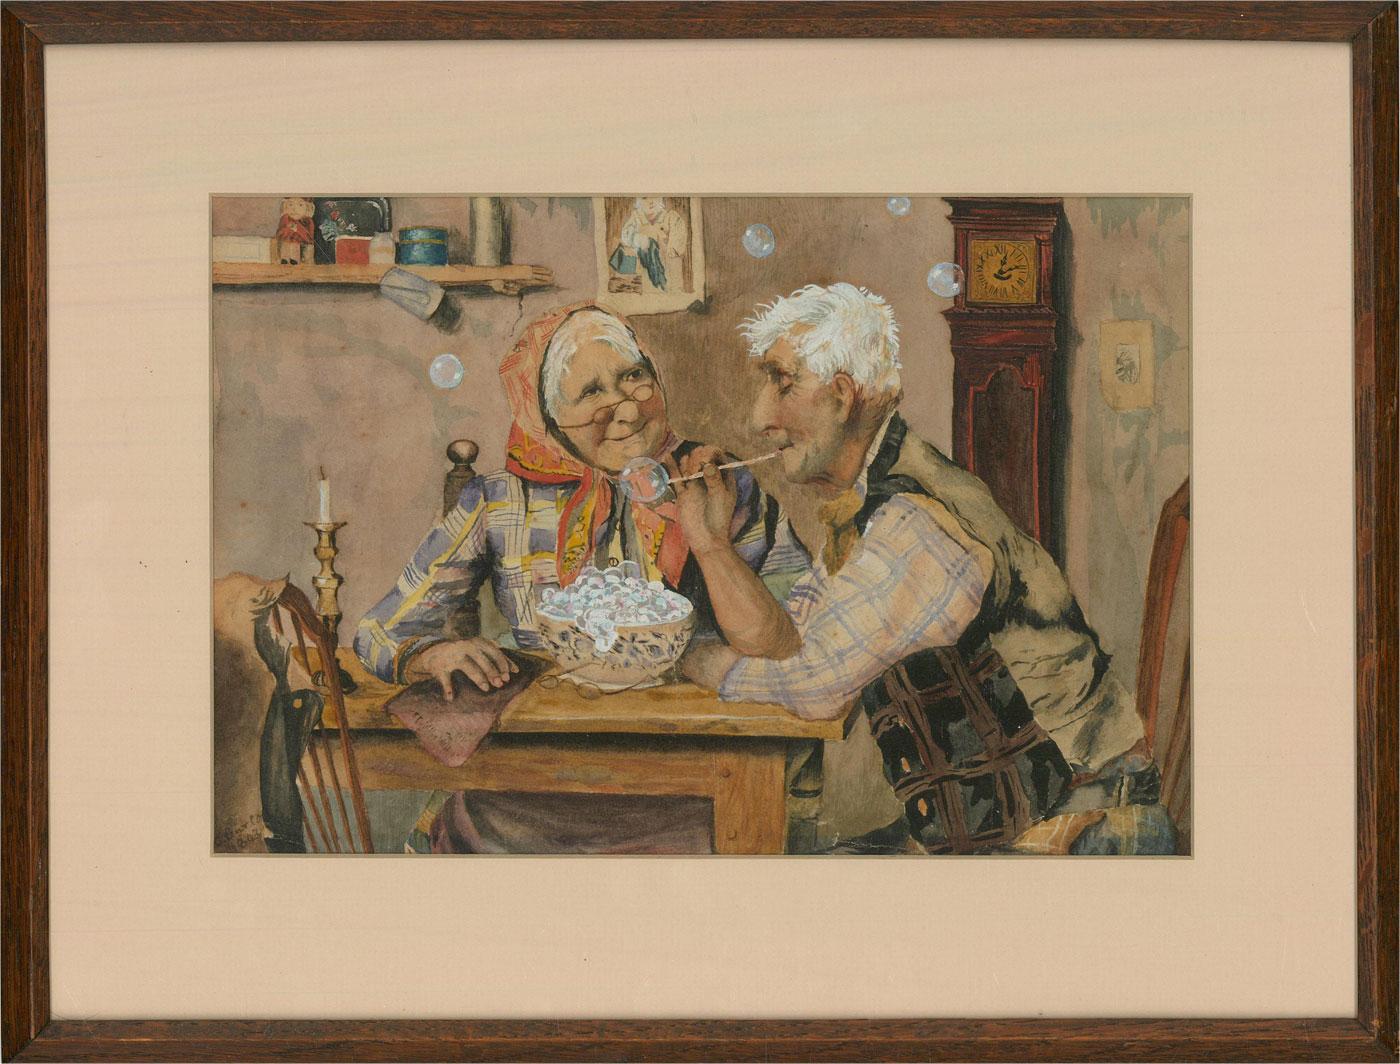 This charming scene depicts an elderly couple blowing bubbles at their kitchen table. The woman looks lovingly at her husband as he cheerfully blows bubbles from a long straw. The artist has captured the scene in fine detail, showing the delightful